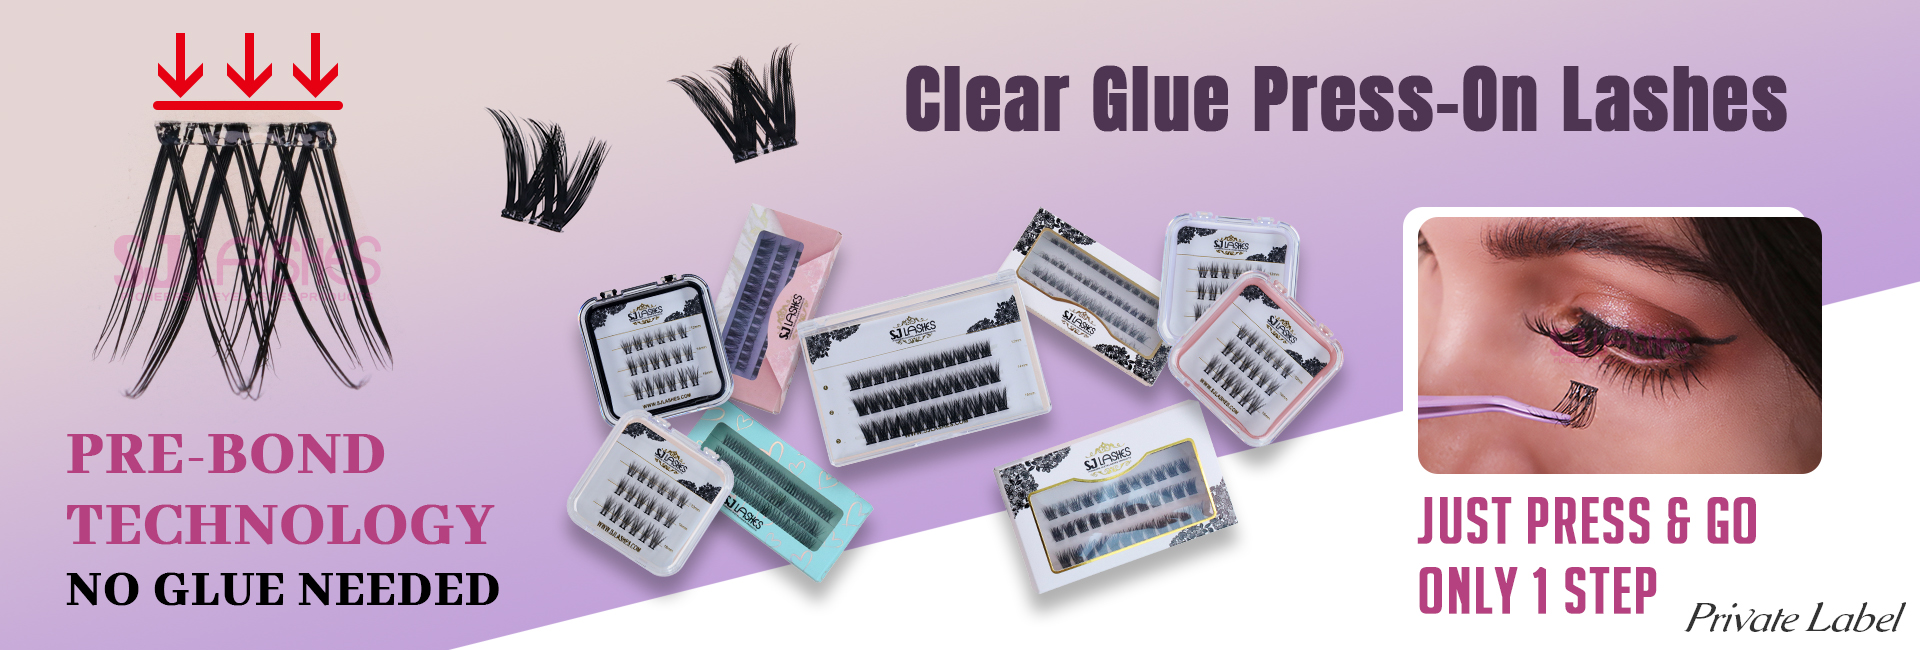 Clear Glue Press-On Lashes